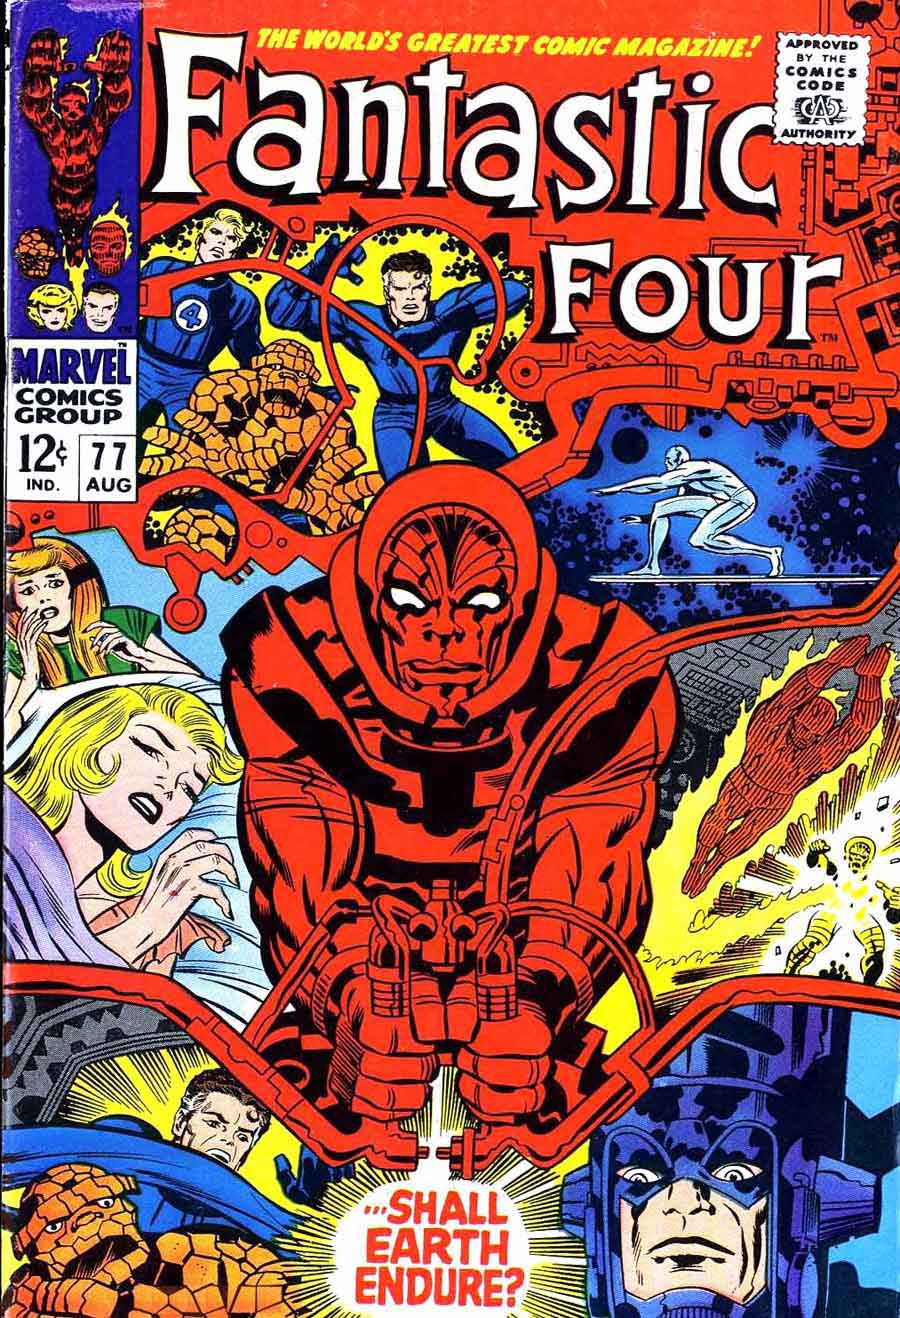 Fantastc Four v1 #77 marvel 1960s silver age comic book cover art by Jack Kirby